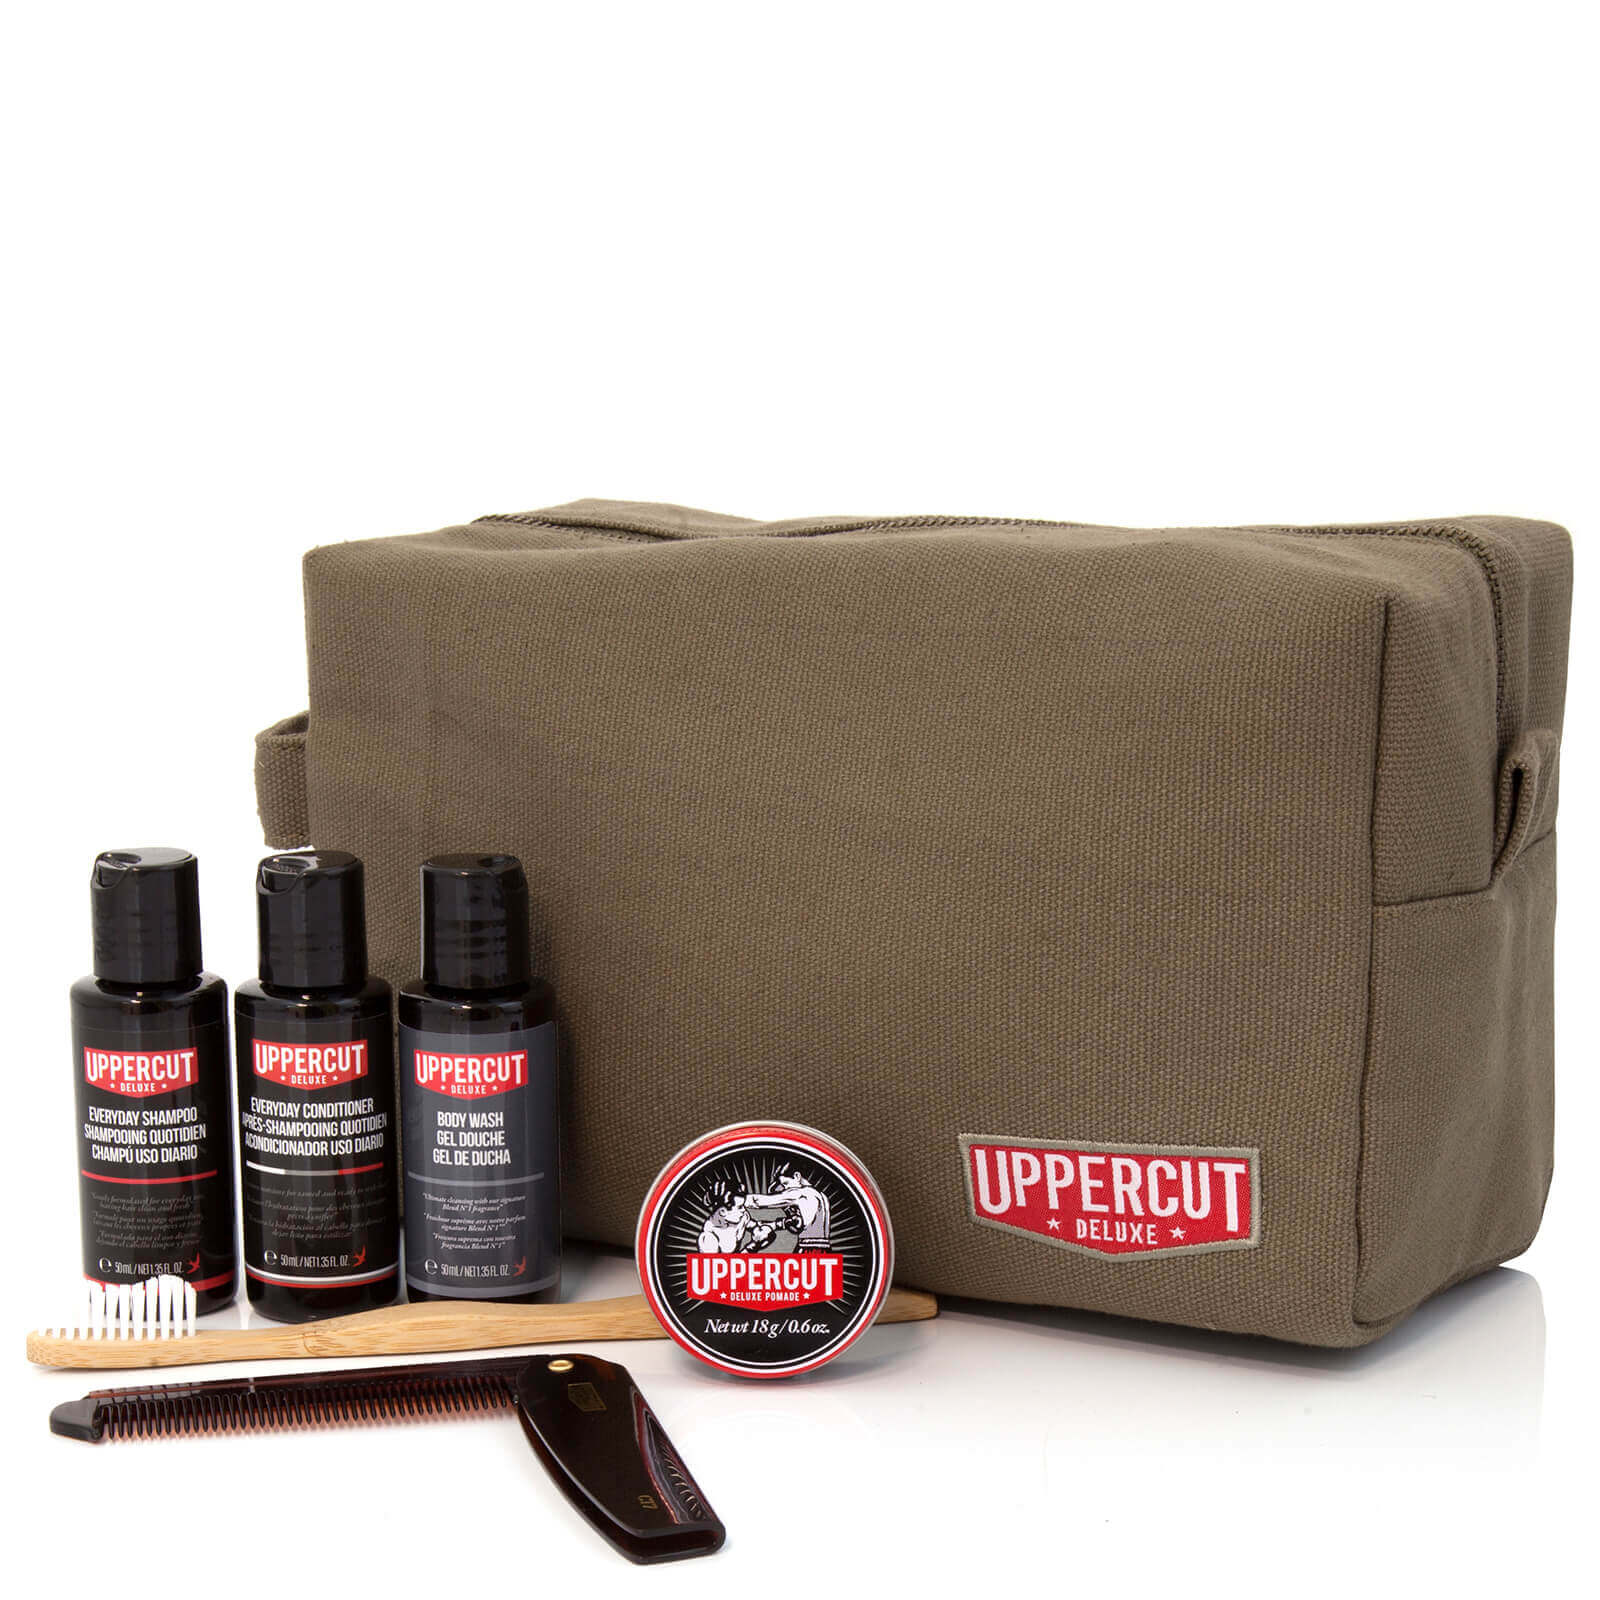 Uppercut Deluxe Wash Bag - Filled Army Green